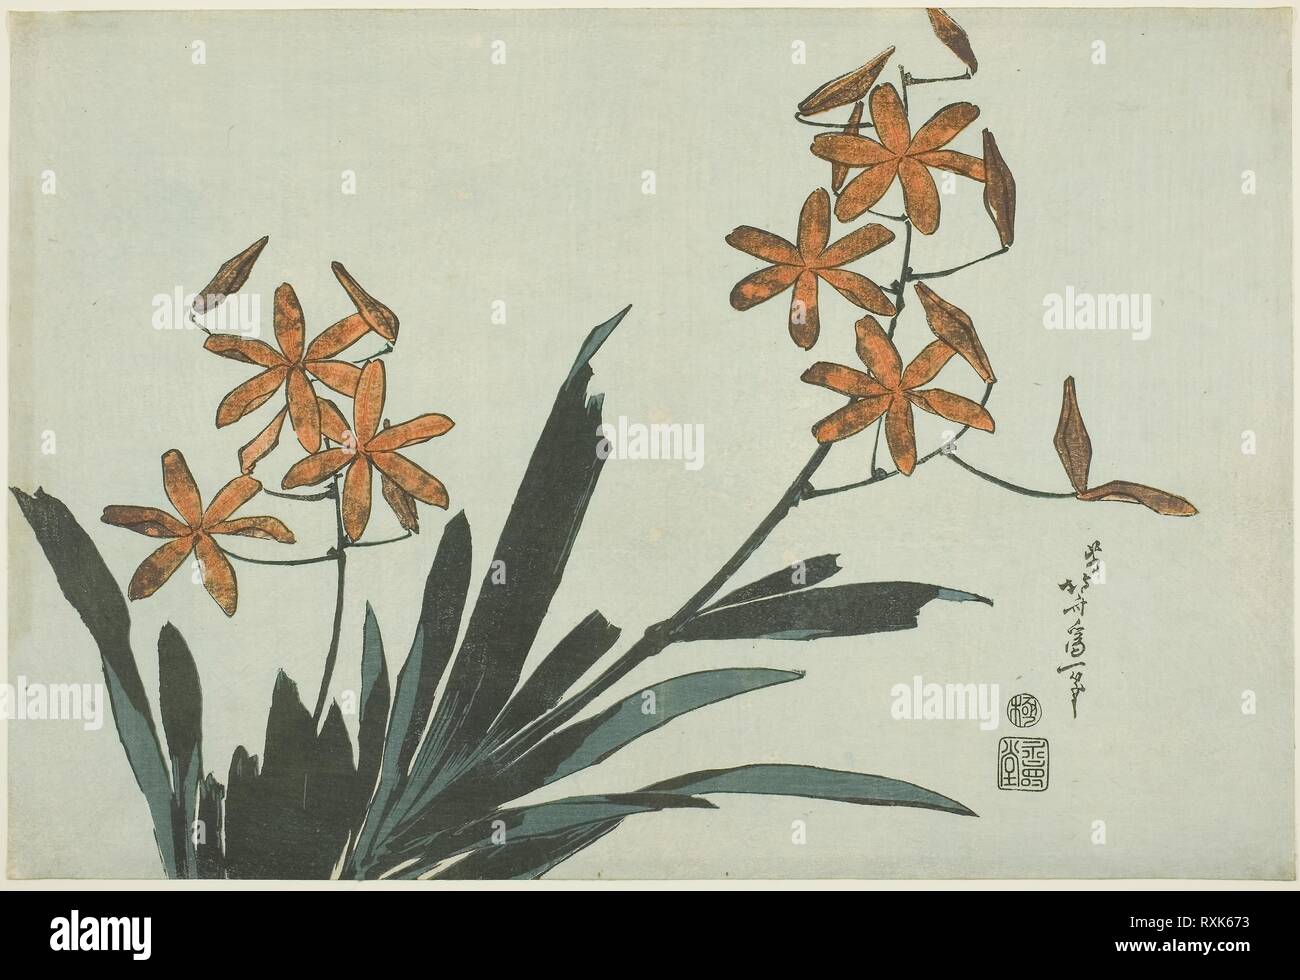 Orange Orchids, from an untitled series of flowers. Katsushika Hokusai ?? ??; Japanese, 1760-1849; Publisher: Hibino Yohachi; Japanese, unknown. Date: 1827-1837. Dimensions: 25.5 x 37.7 cm (10 x 14 1/2 in.). Color woodblock print; oban. Origin: Japan. Museum: The Chicago Art Institute. Stock Photo